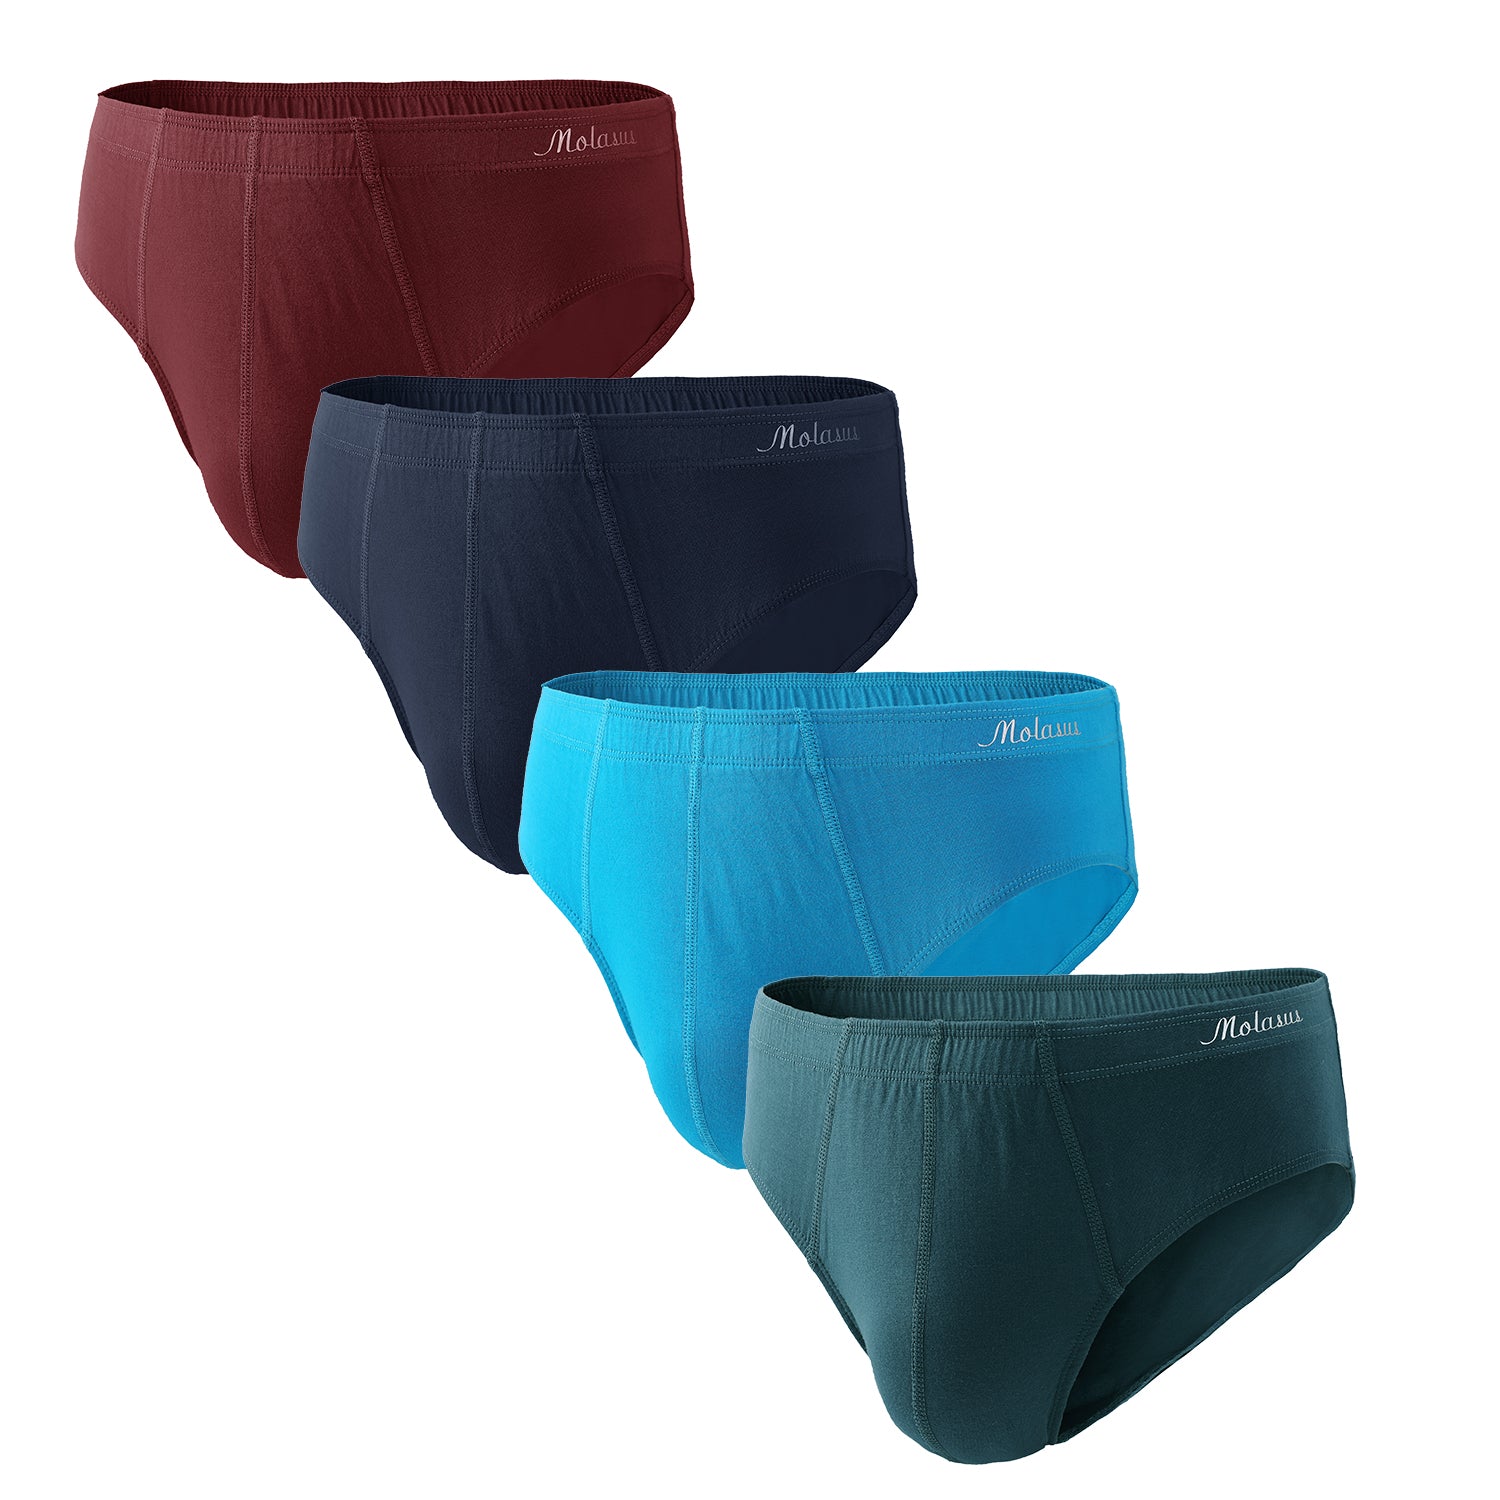 3-6 Men's Underwear Multipack Modal Cotton Briefs No Fly Covered